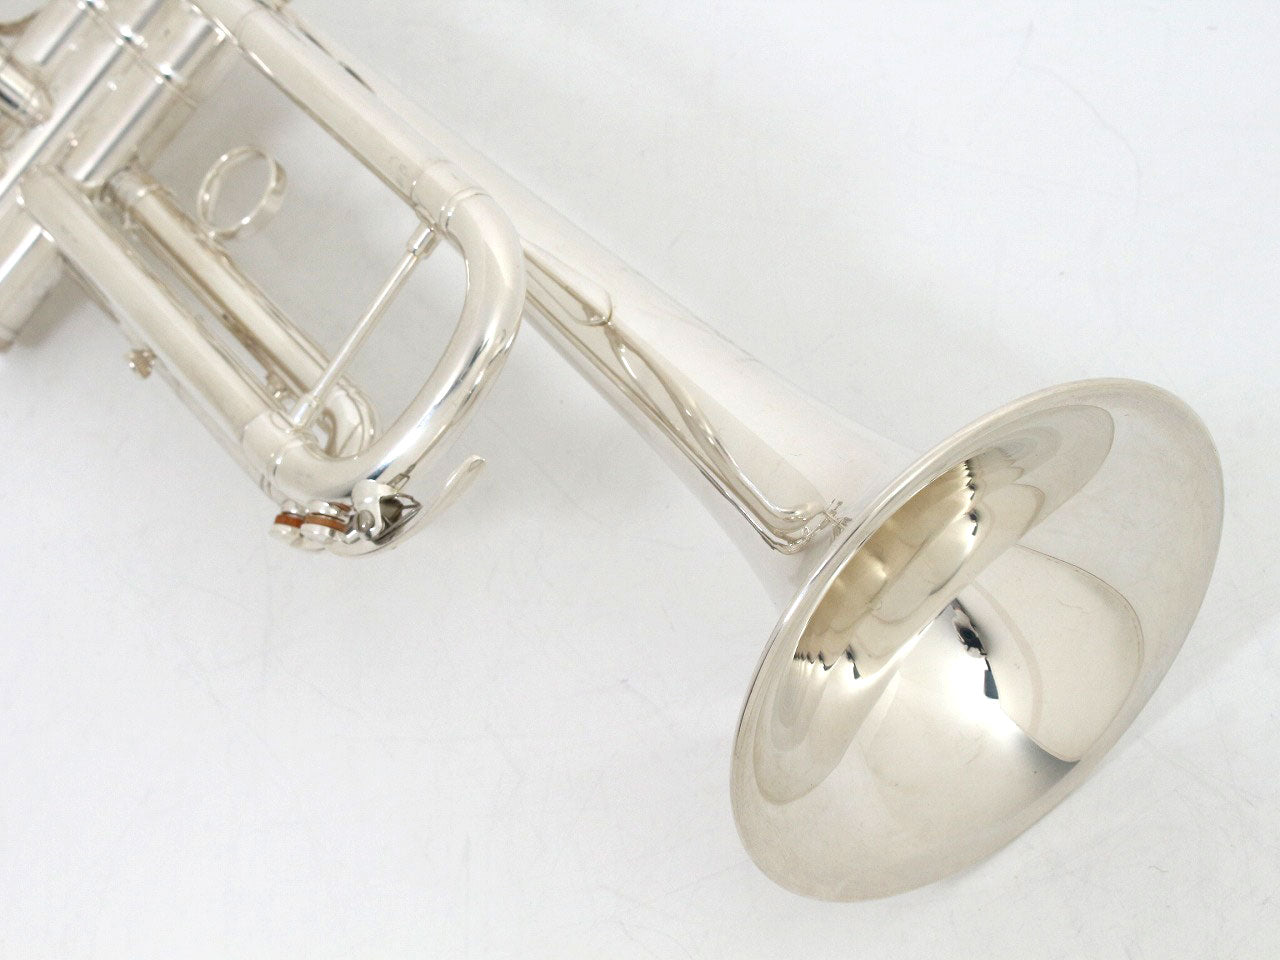 [SN D28711] USED YAMAHA / Trumpet YTR-4335GSII Made in Japan, silver plated finish [20]